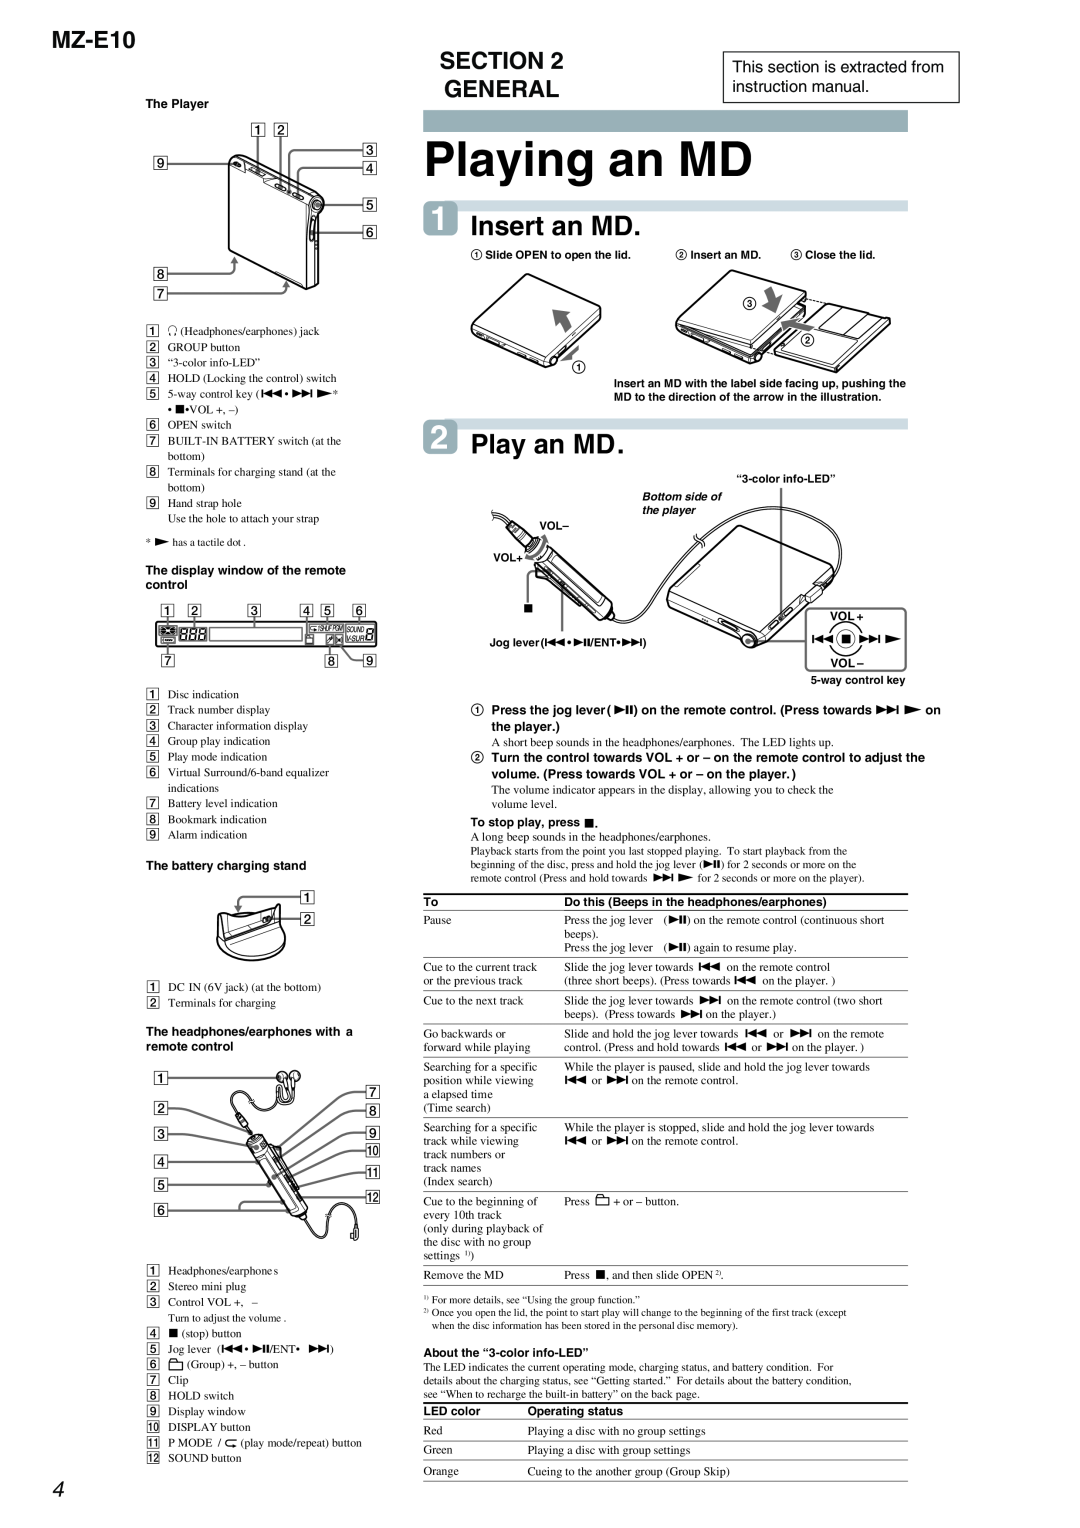 Sony service manual C Playing an MD, 1Insert an MD, 2Play an MD, MZ-E10 SECTION GENERAL 